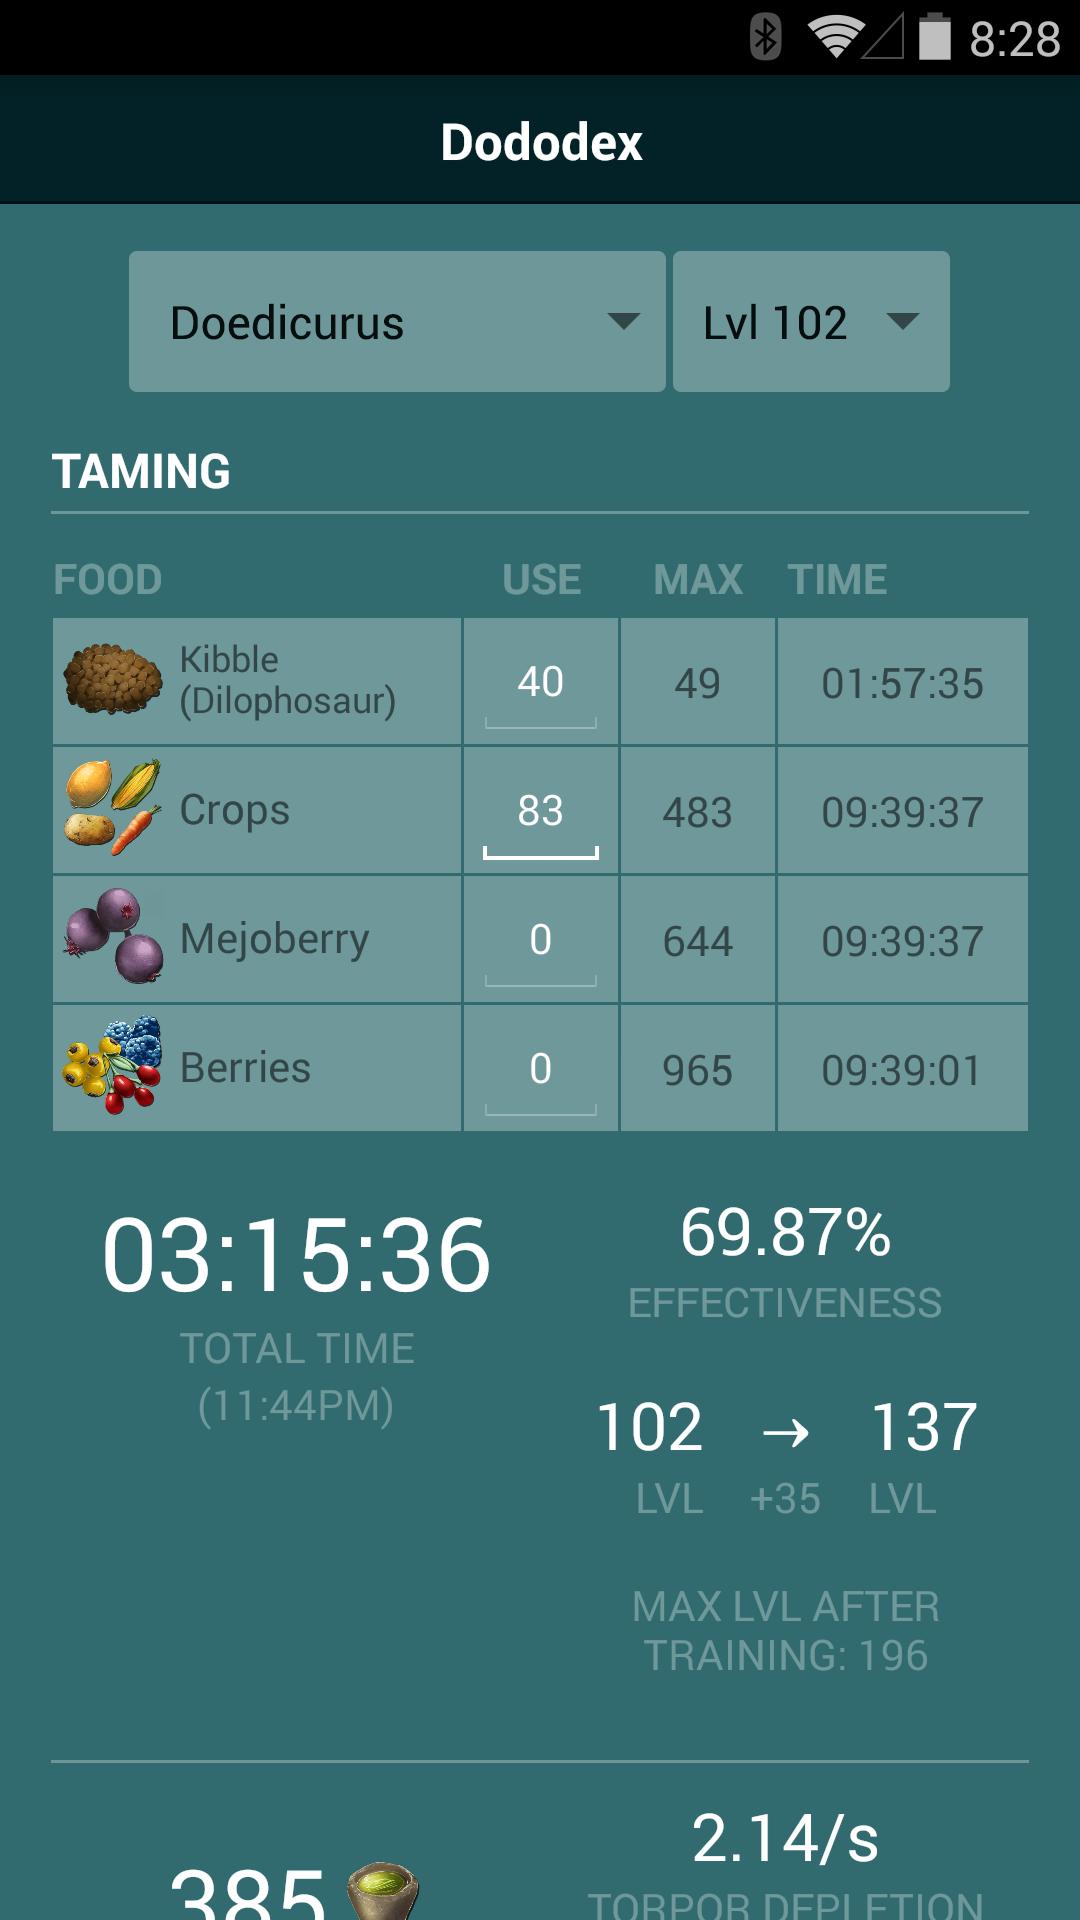 Dododex for Android - APK Download